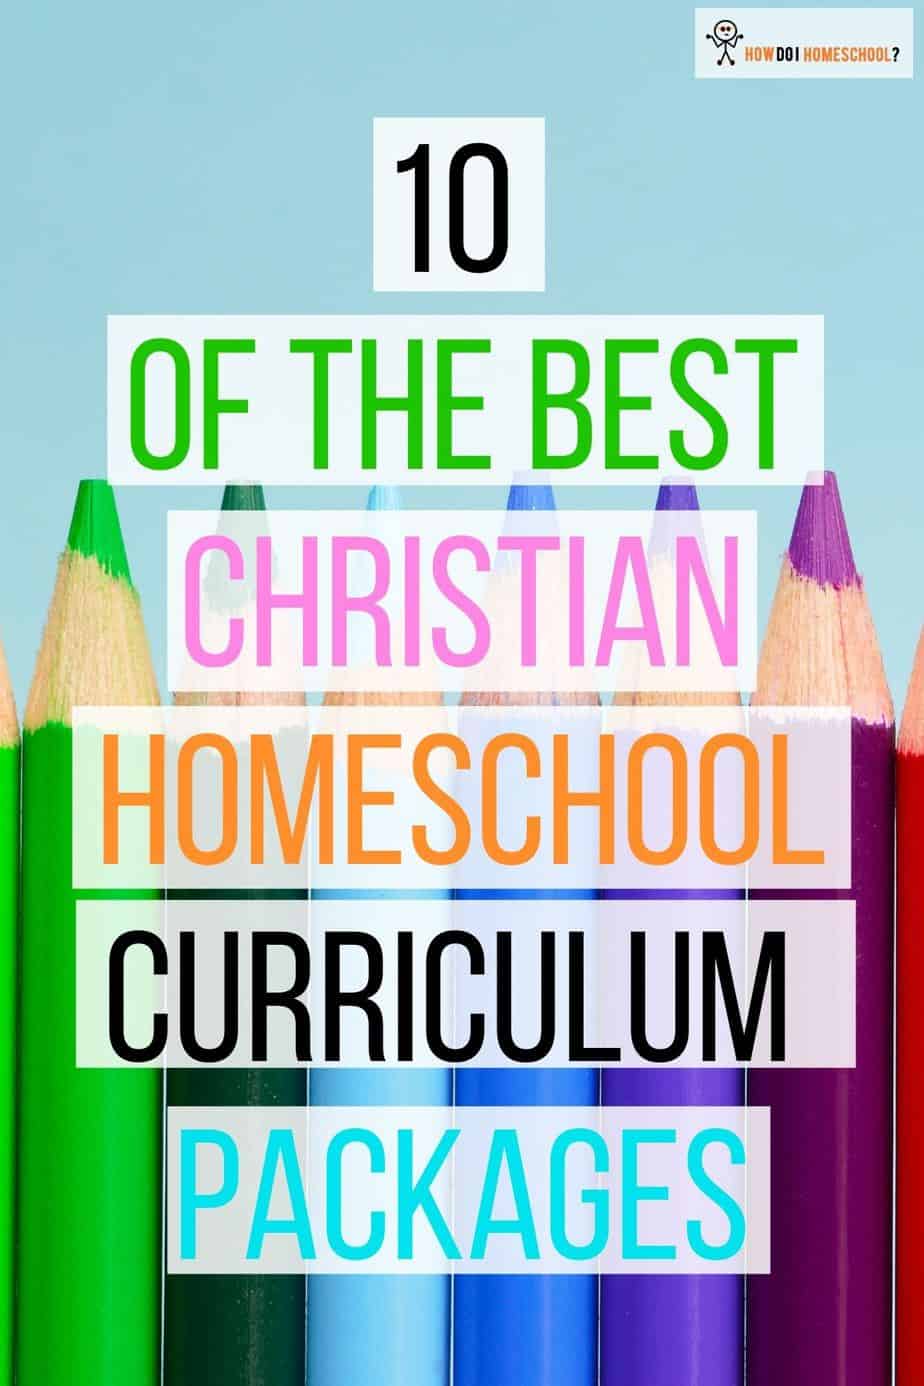 10 of the Best Christian #Homeschool #Curricula. Christian homeschooling curriculum reviews: #Abeka, #Sonlight, Saxon Maths, Bob Jones University (#BJU), Switched on Schoolhouse (#SOS), Monarch, Accelerated Christian Education (ACE paces), Easy Peasy All-in-One, The Good and the Beautiful and Classical Conversations. See reviews from #howdoihomeschool